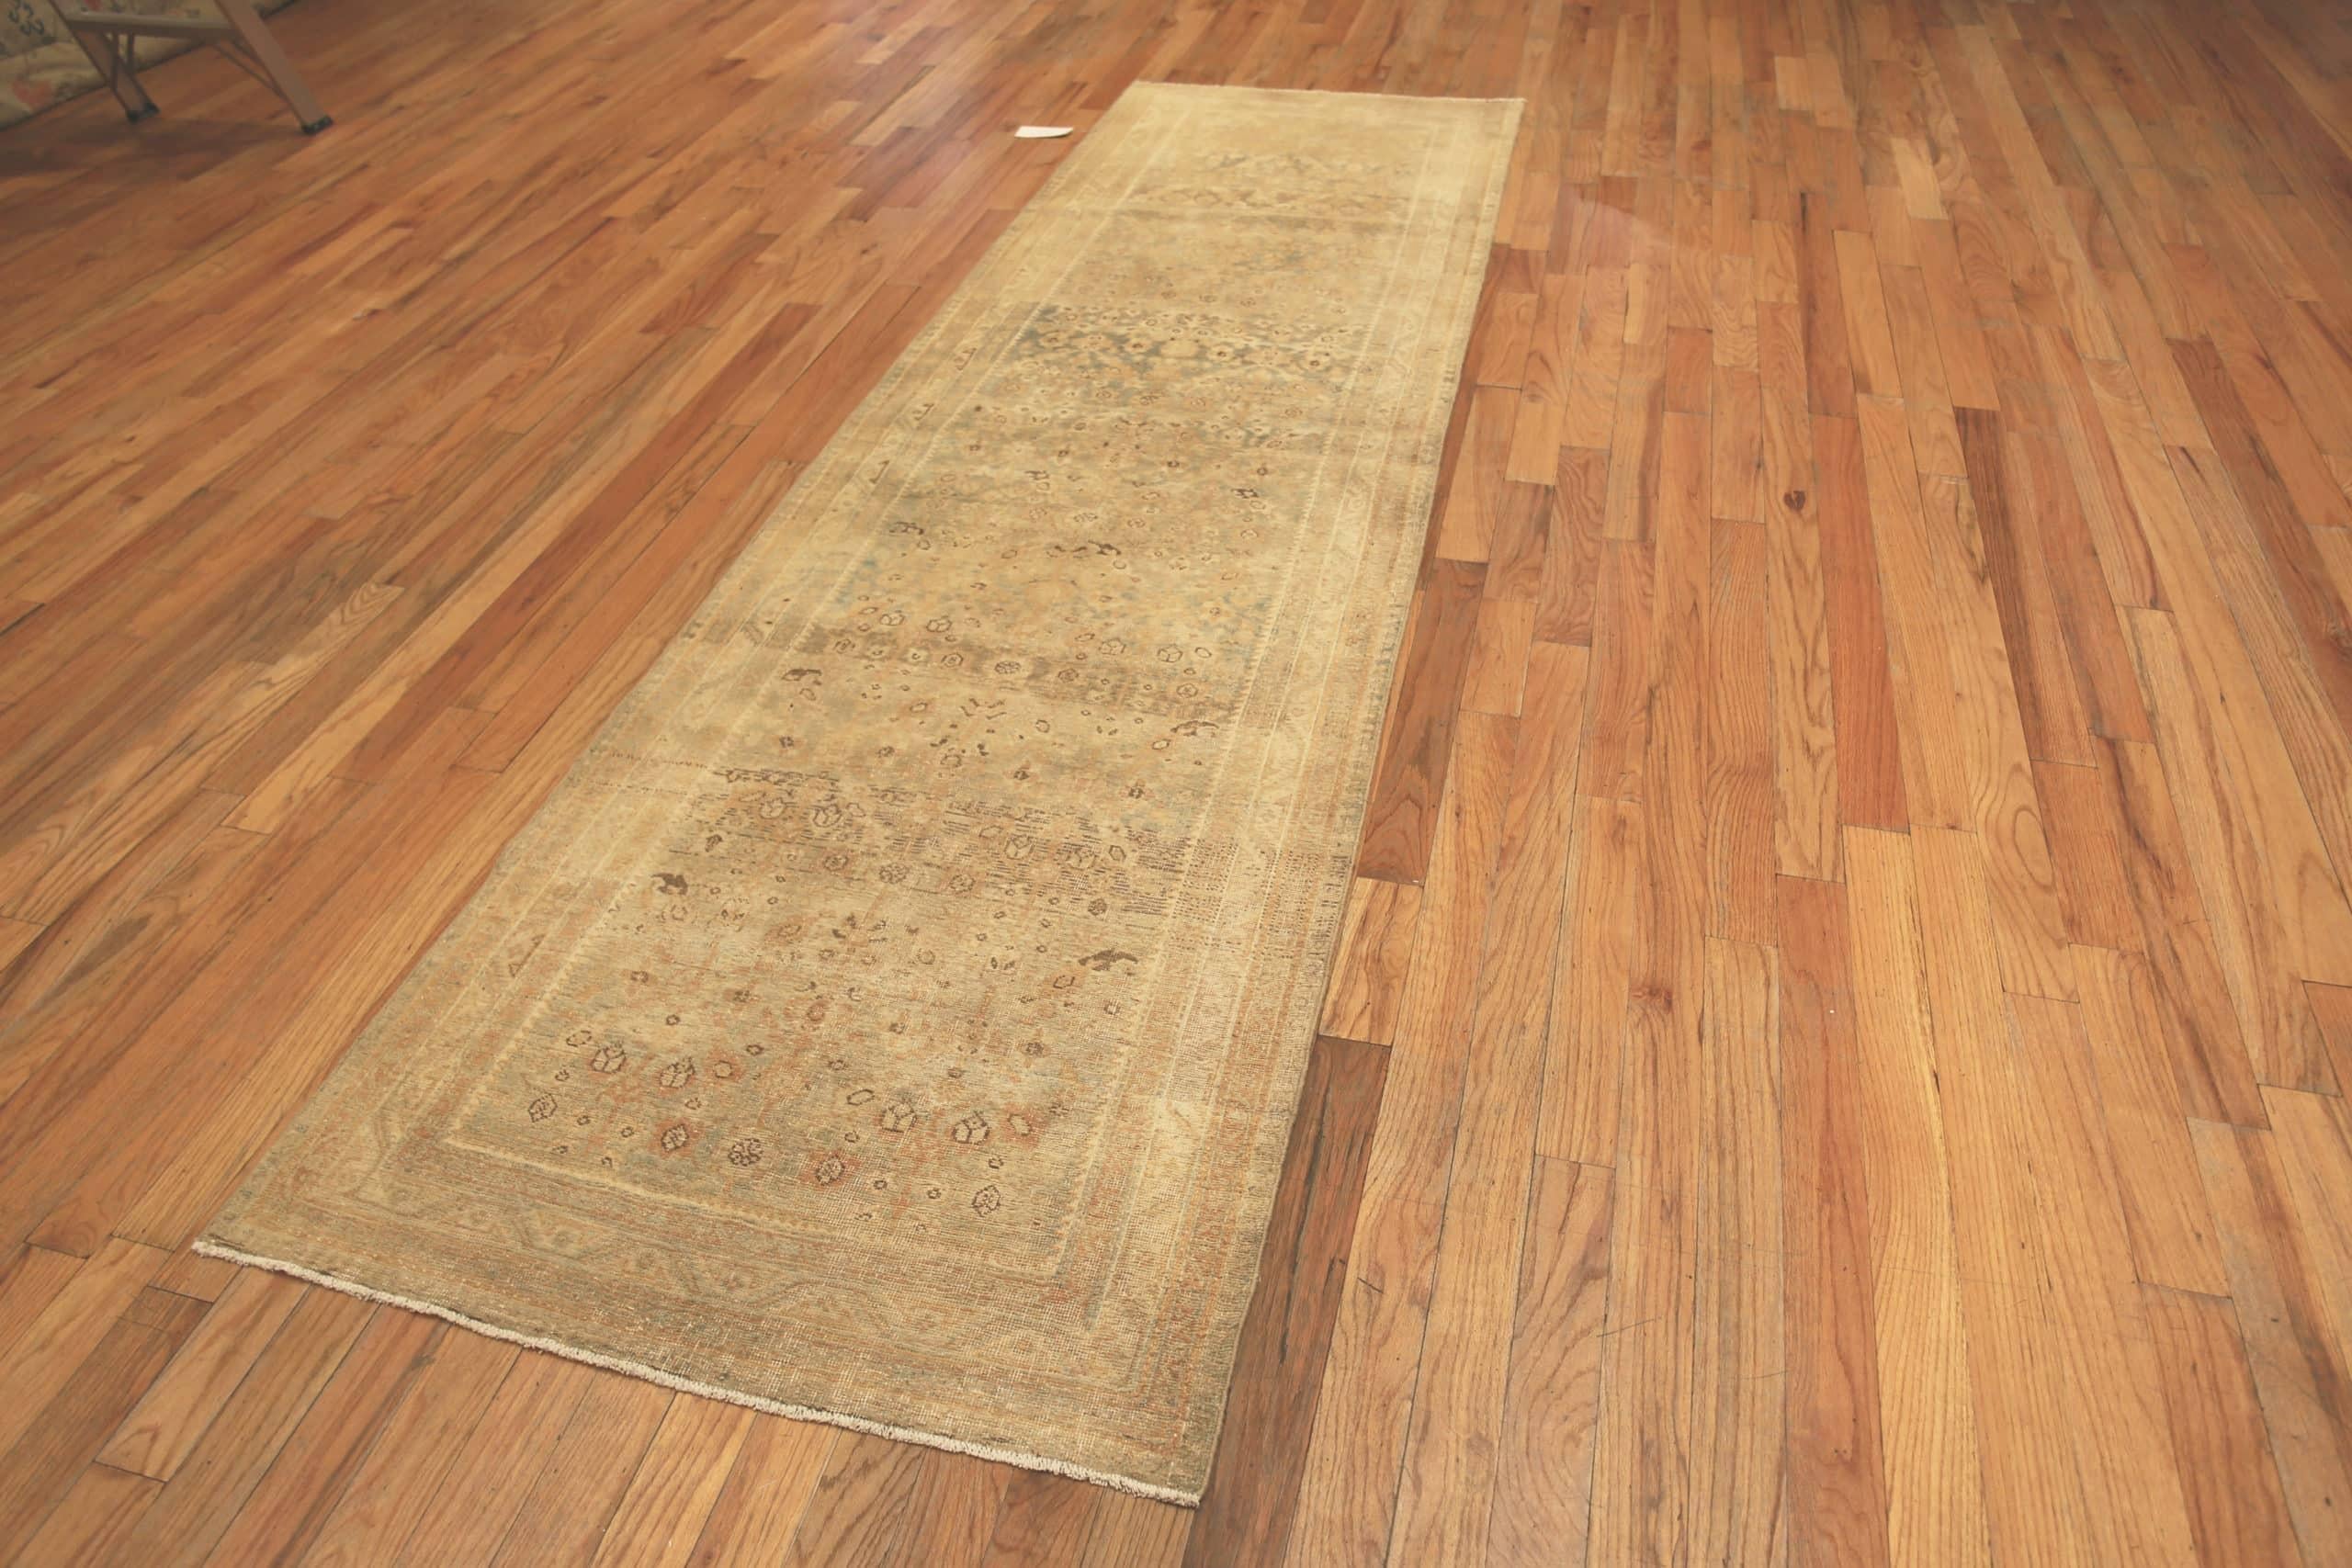 Neutral Washed Out Decorative Antique Warm Tone Tribal Persian Herati Malayer Hallway Runner Rug, Country of Origin: Persia, Circa date: 1920. Size: 3 ft 6 in x 11 ft 10 in (1.07 m x 3.61 m)
